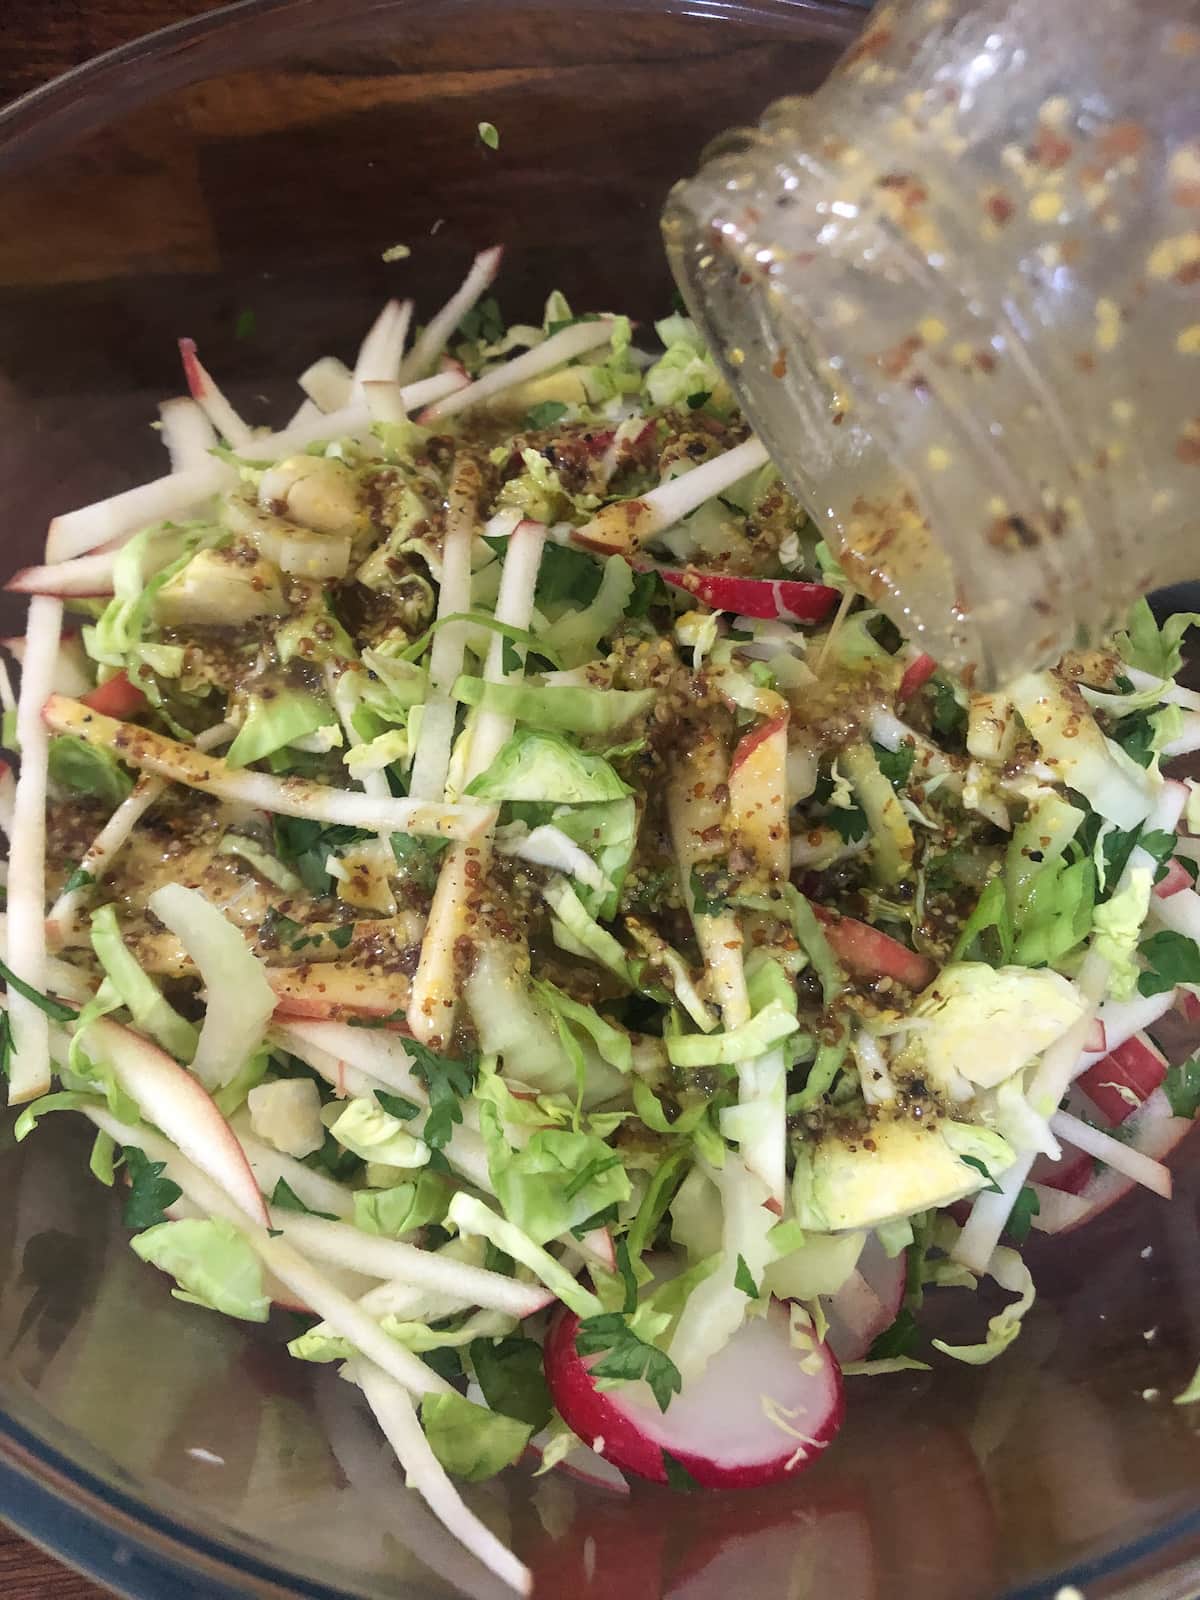 A glass bowl filled with shredded sprout slaw ingredients with a jar of honey and mustard salad dressing being poured over.